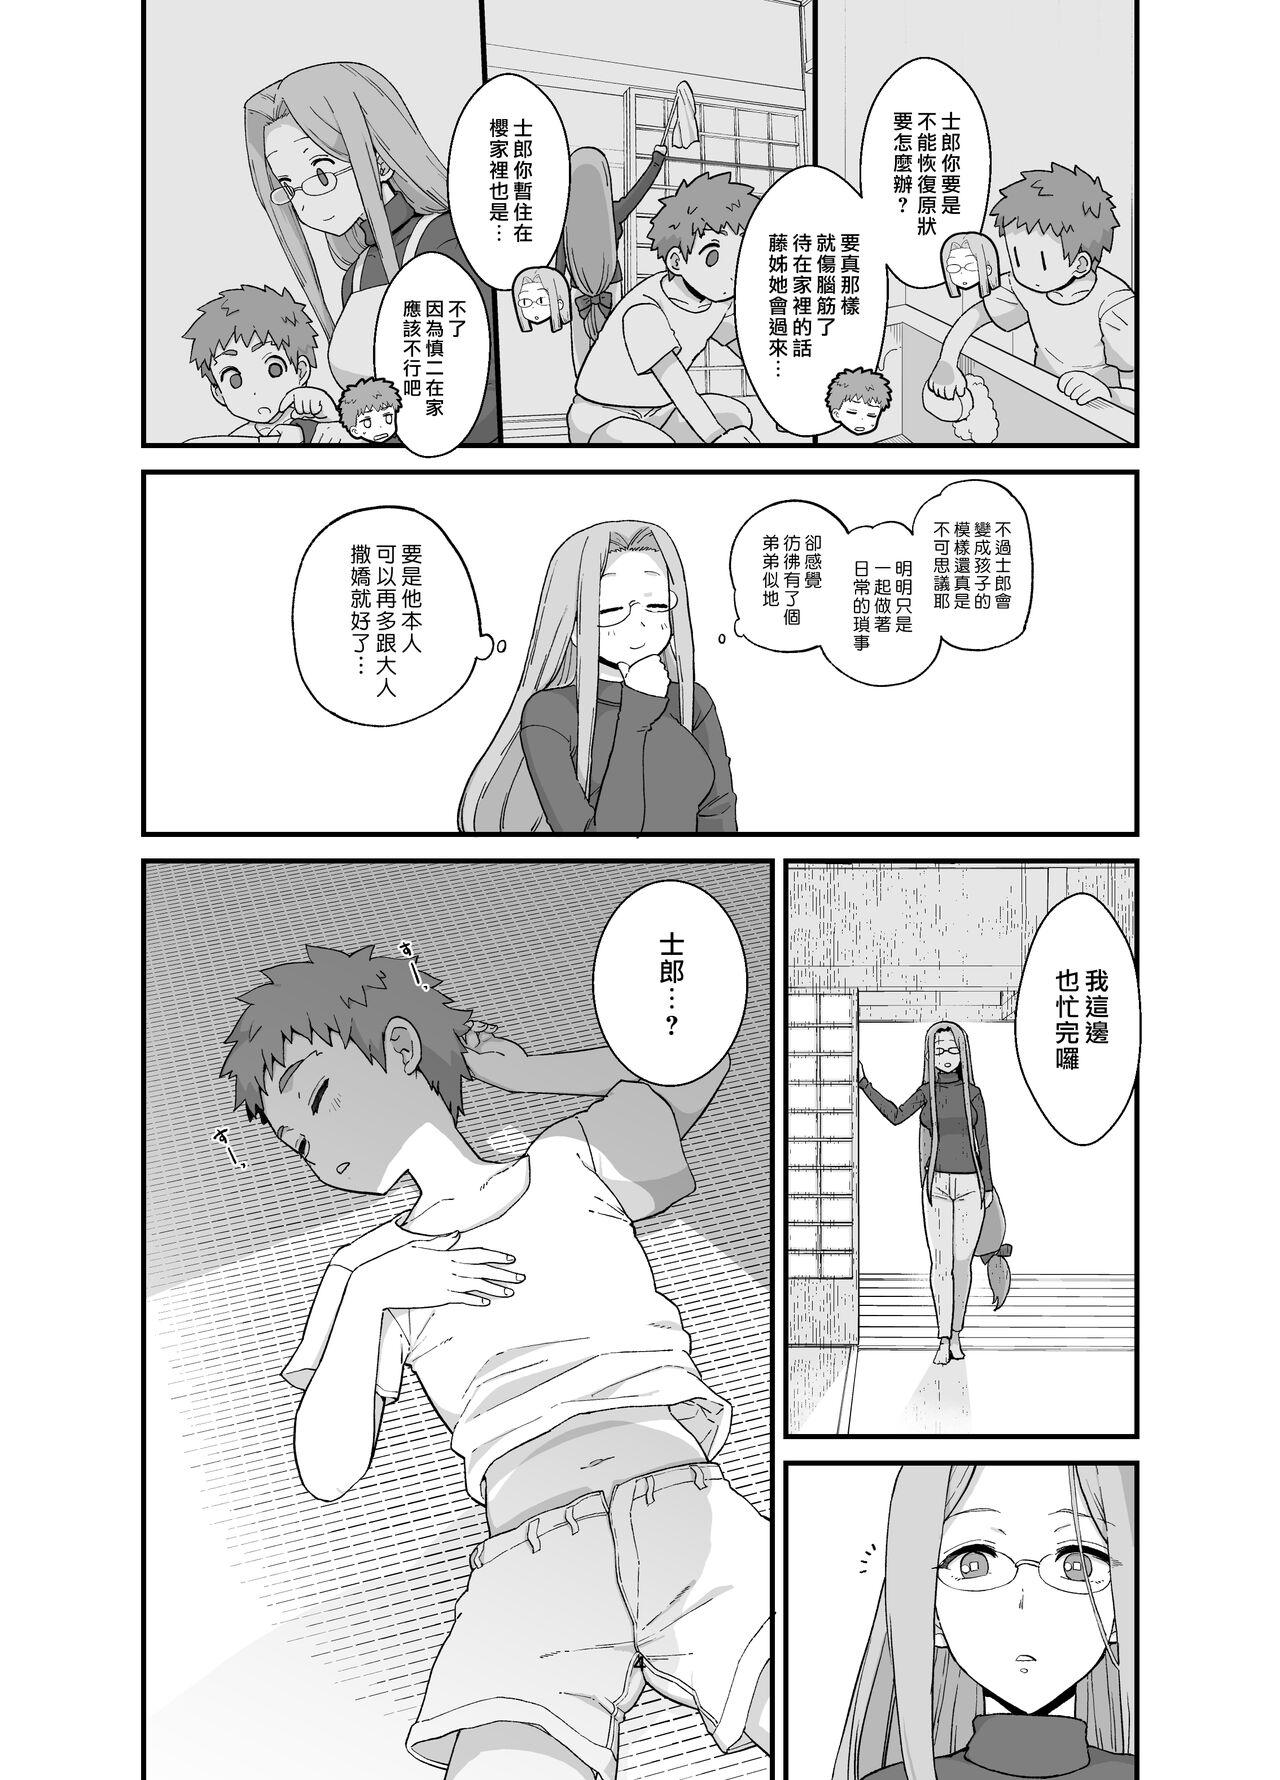 Culos Rider-san to Orusuban - Fate stay night Firsttime - Page 7